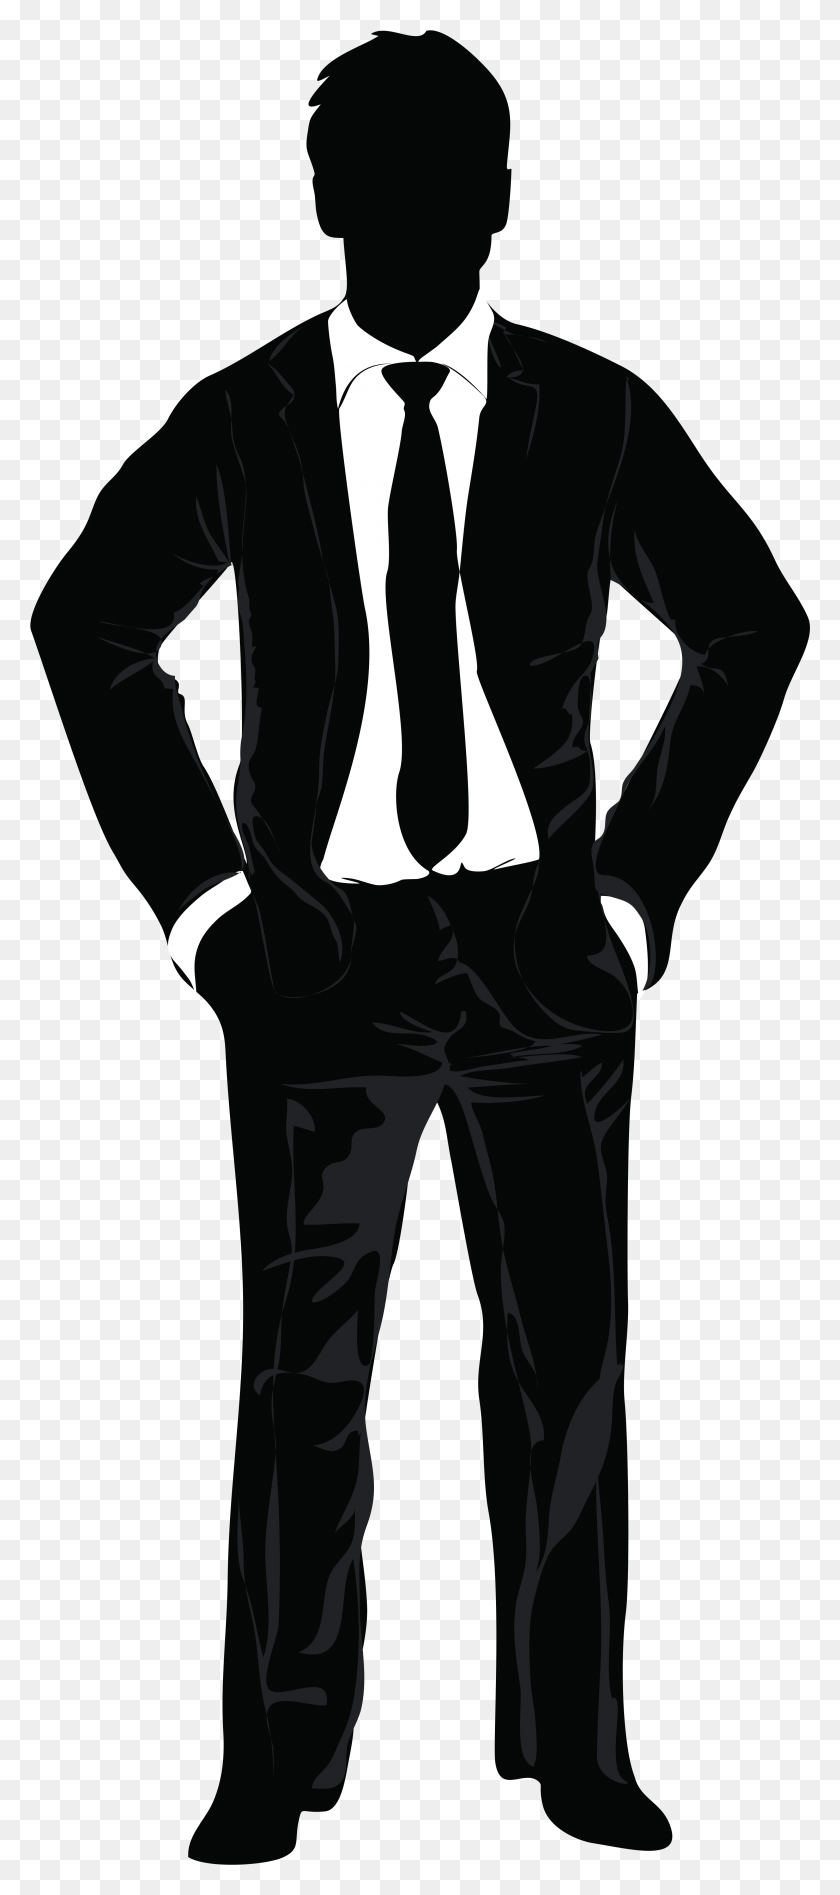 2991x7039 Confident Working Man Silhouette Silhouette Homme Debout Profil, Sleeve, Clothing, Apparel Descargar Hd Png